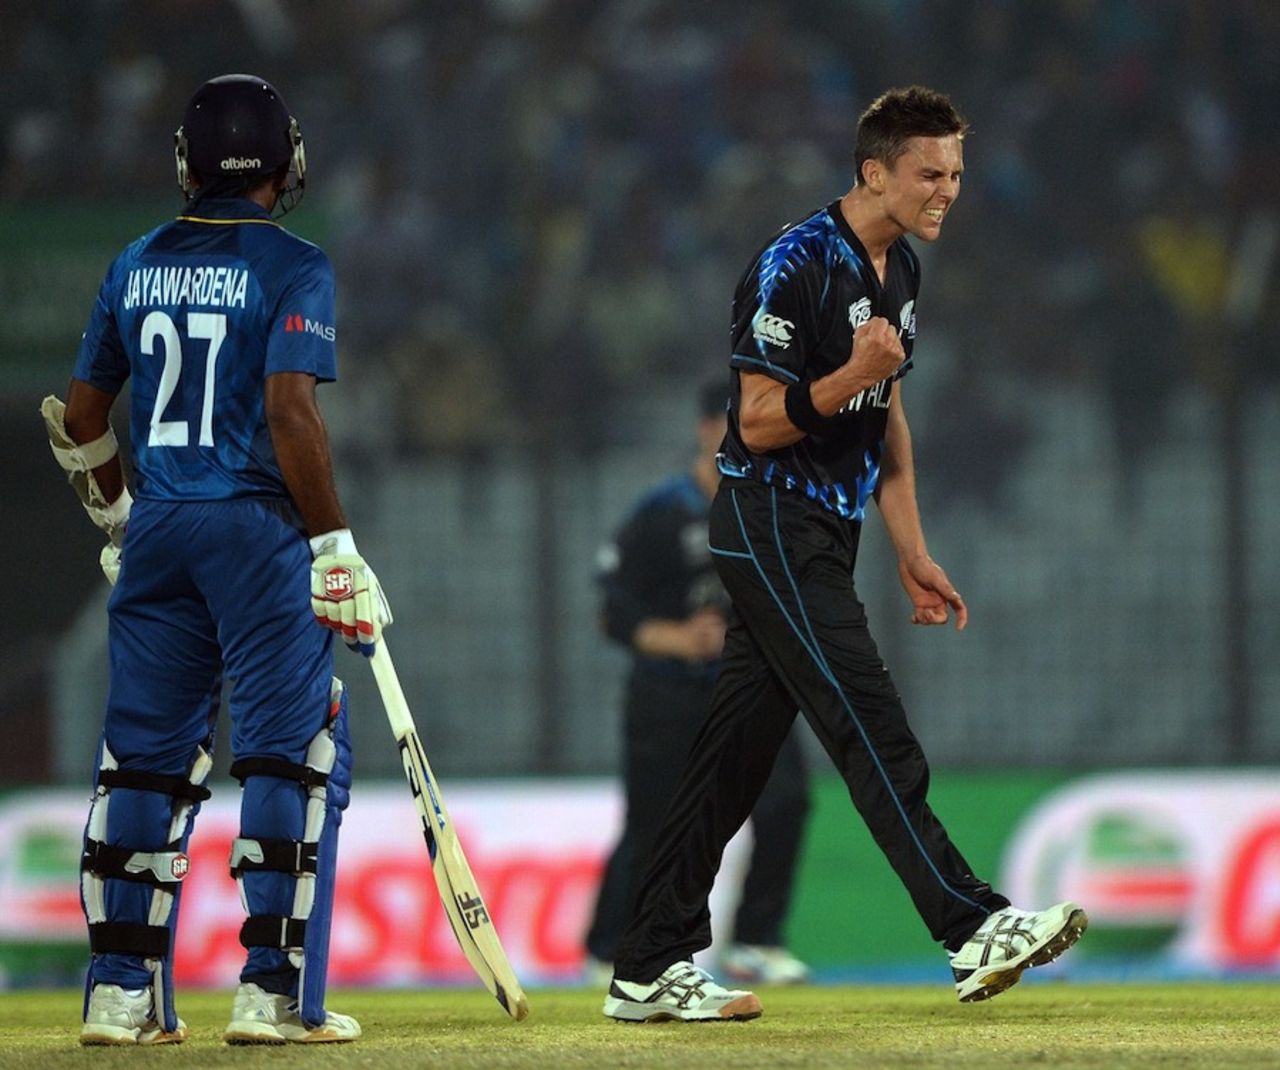 Trent Boult celebrates one of his three wickets, New Zealand v Sri Lanka, World T20, Group 1, Chittagong, March 31, 2014